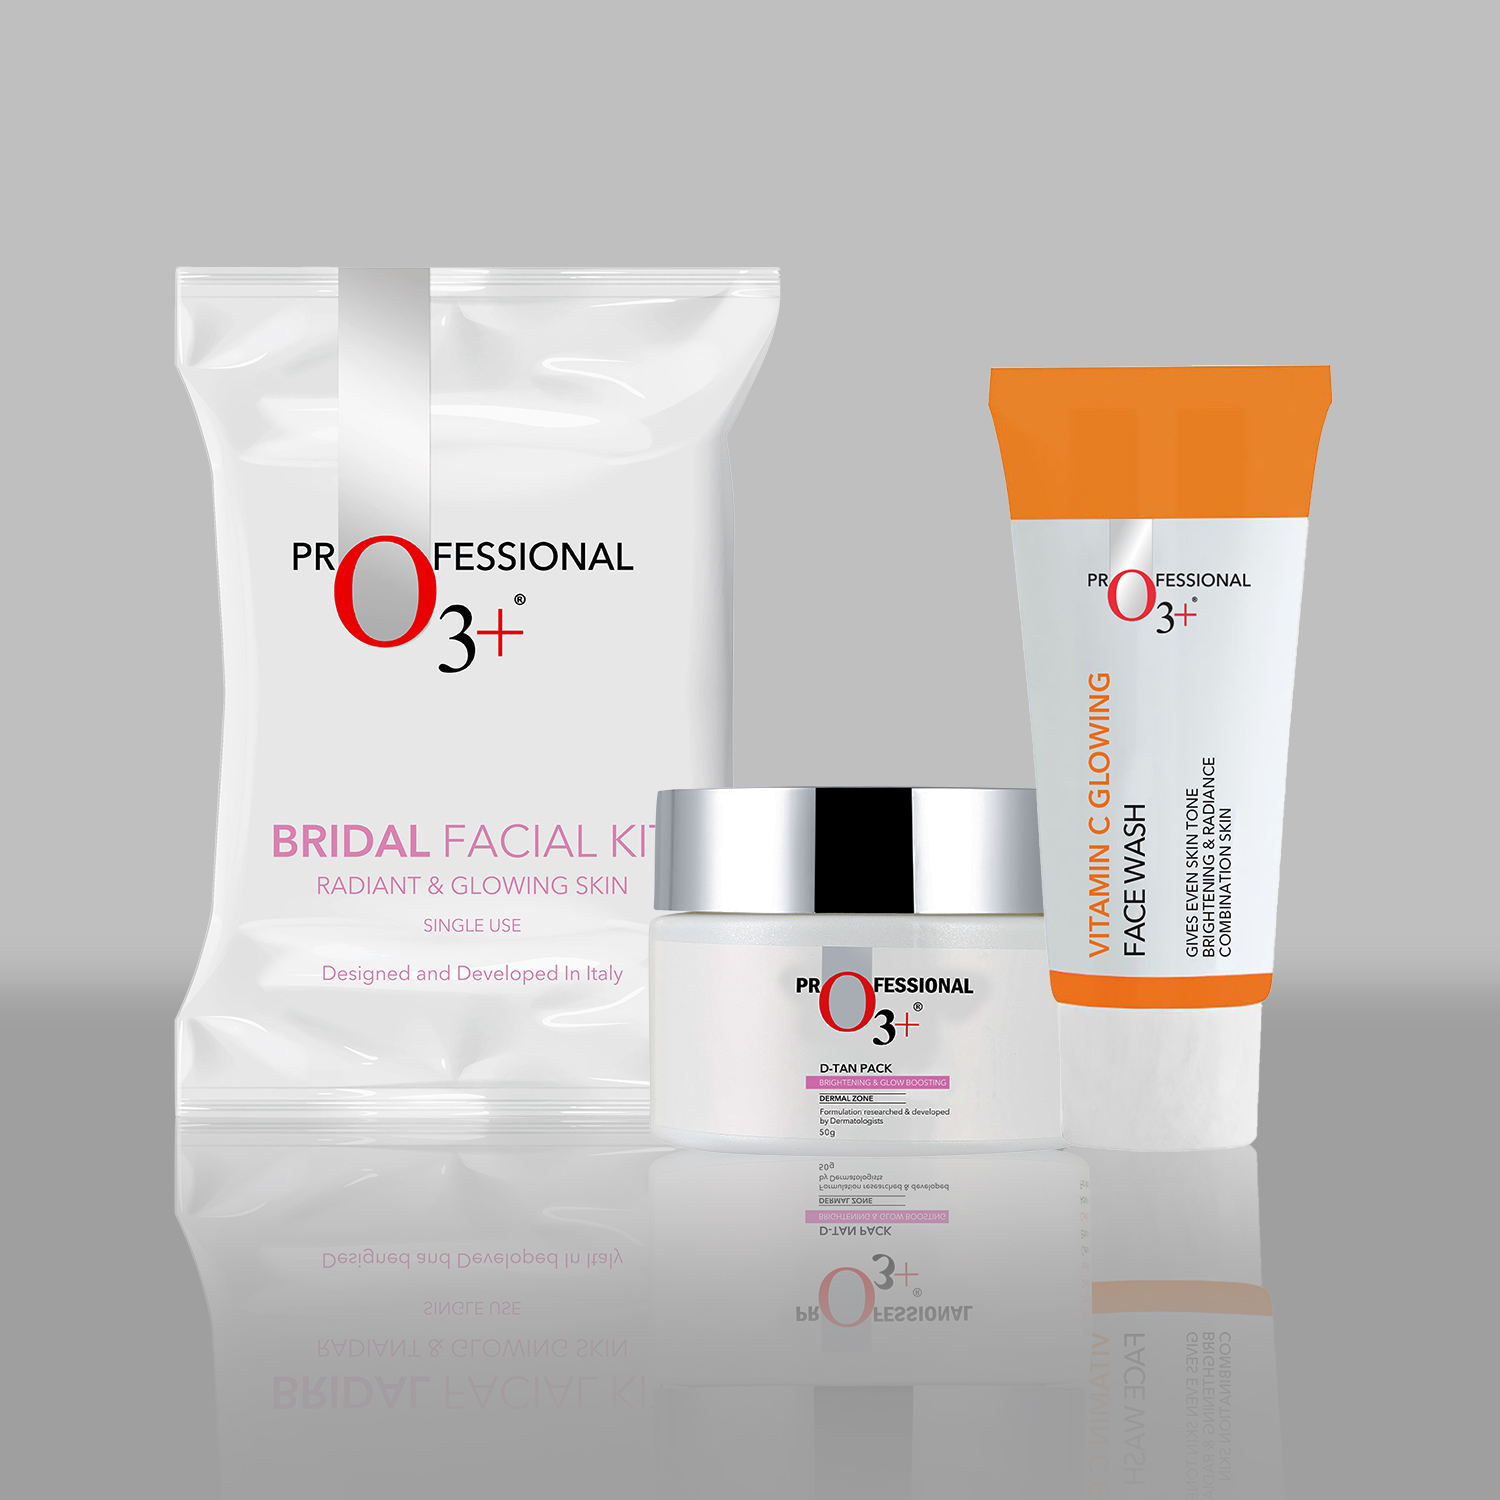 Gift your partner a bag full of pampering with O3+